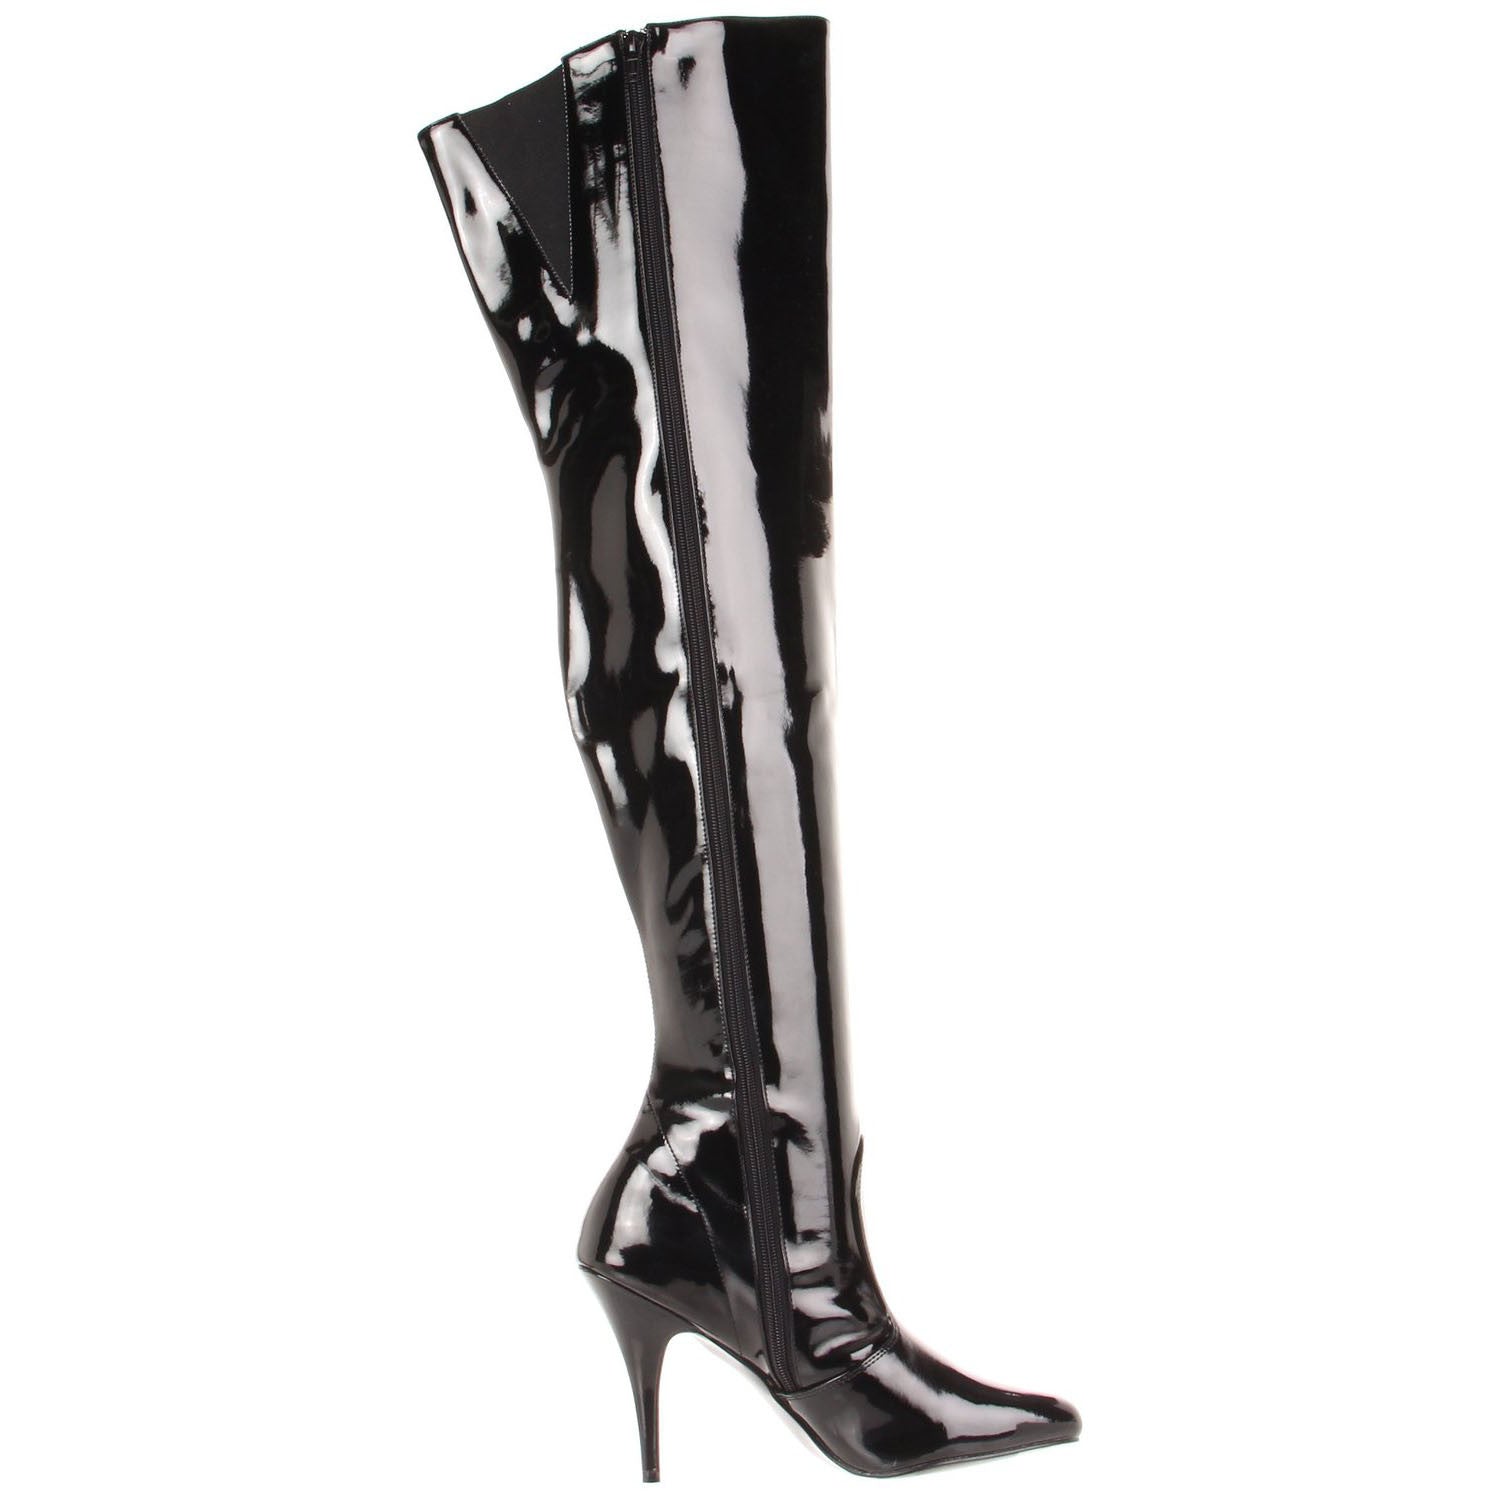 Pleaser VANITY-3010 Black Patent Thigh High Boots - Shoecup.com - 7